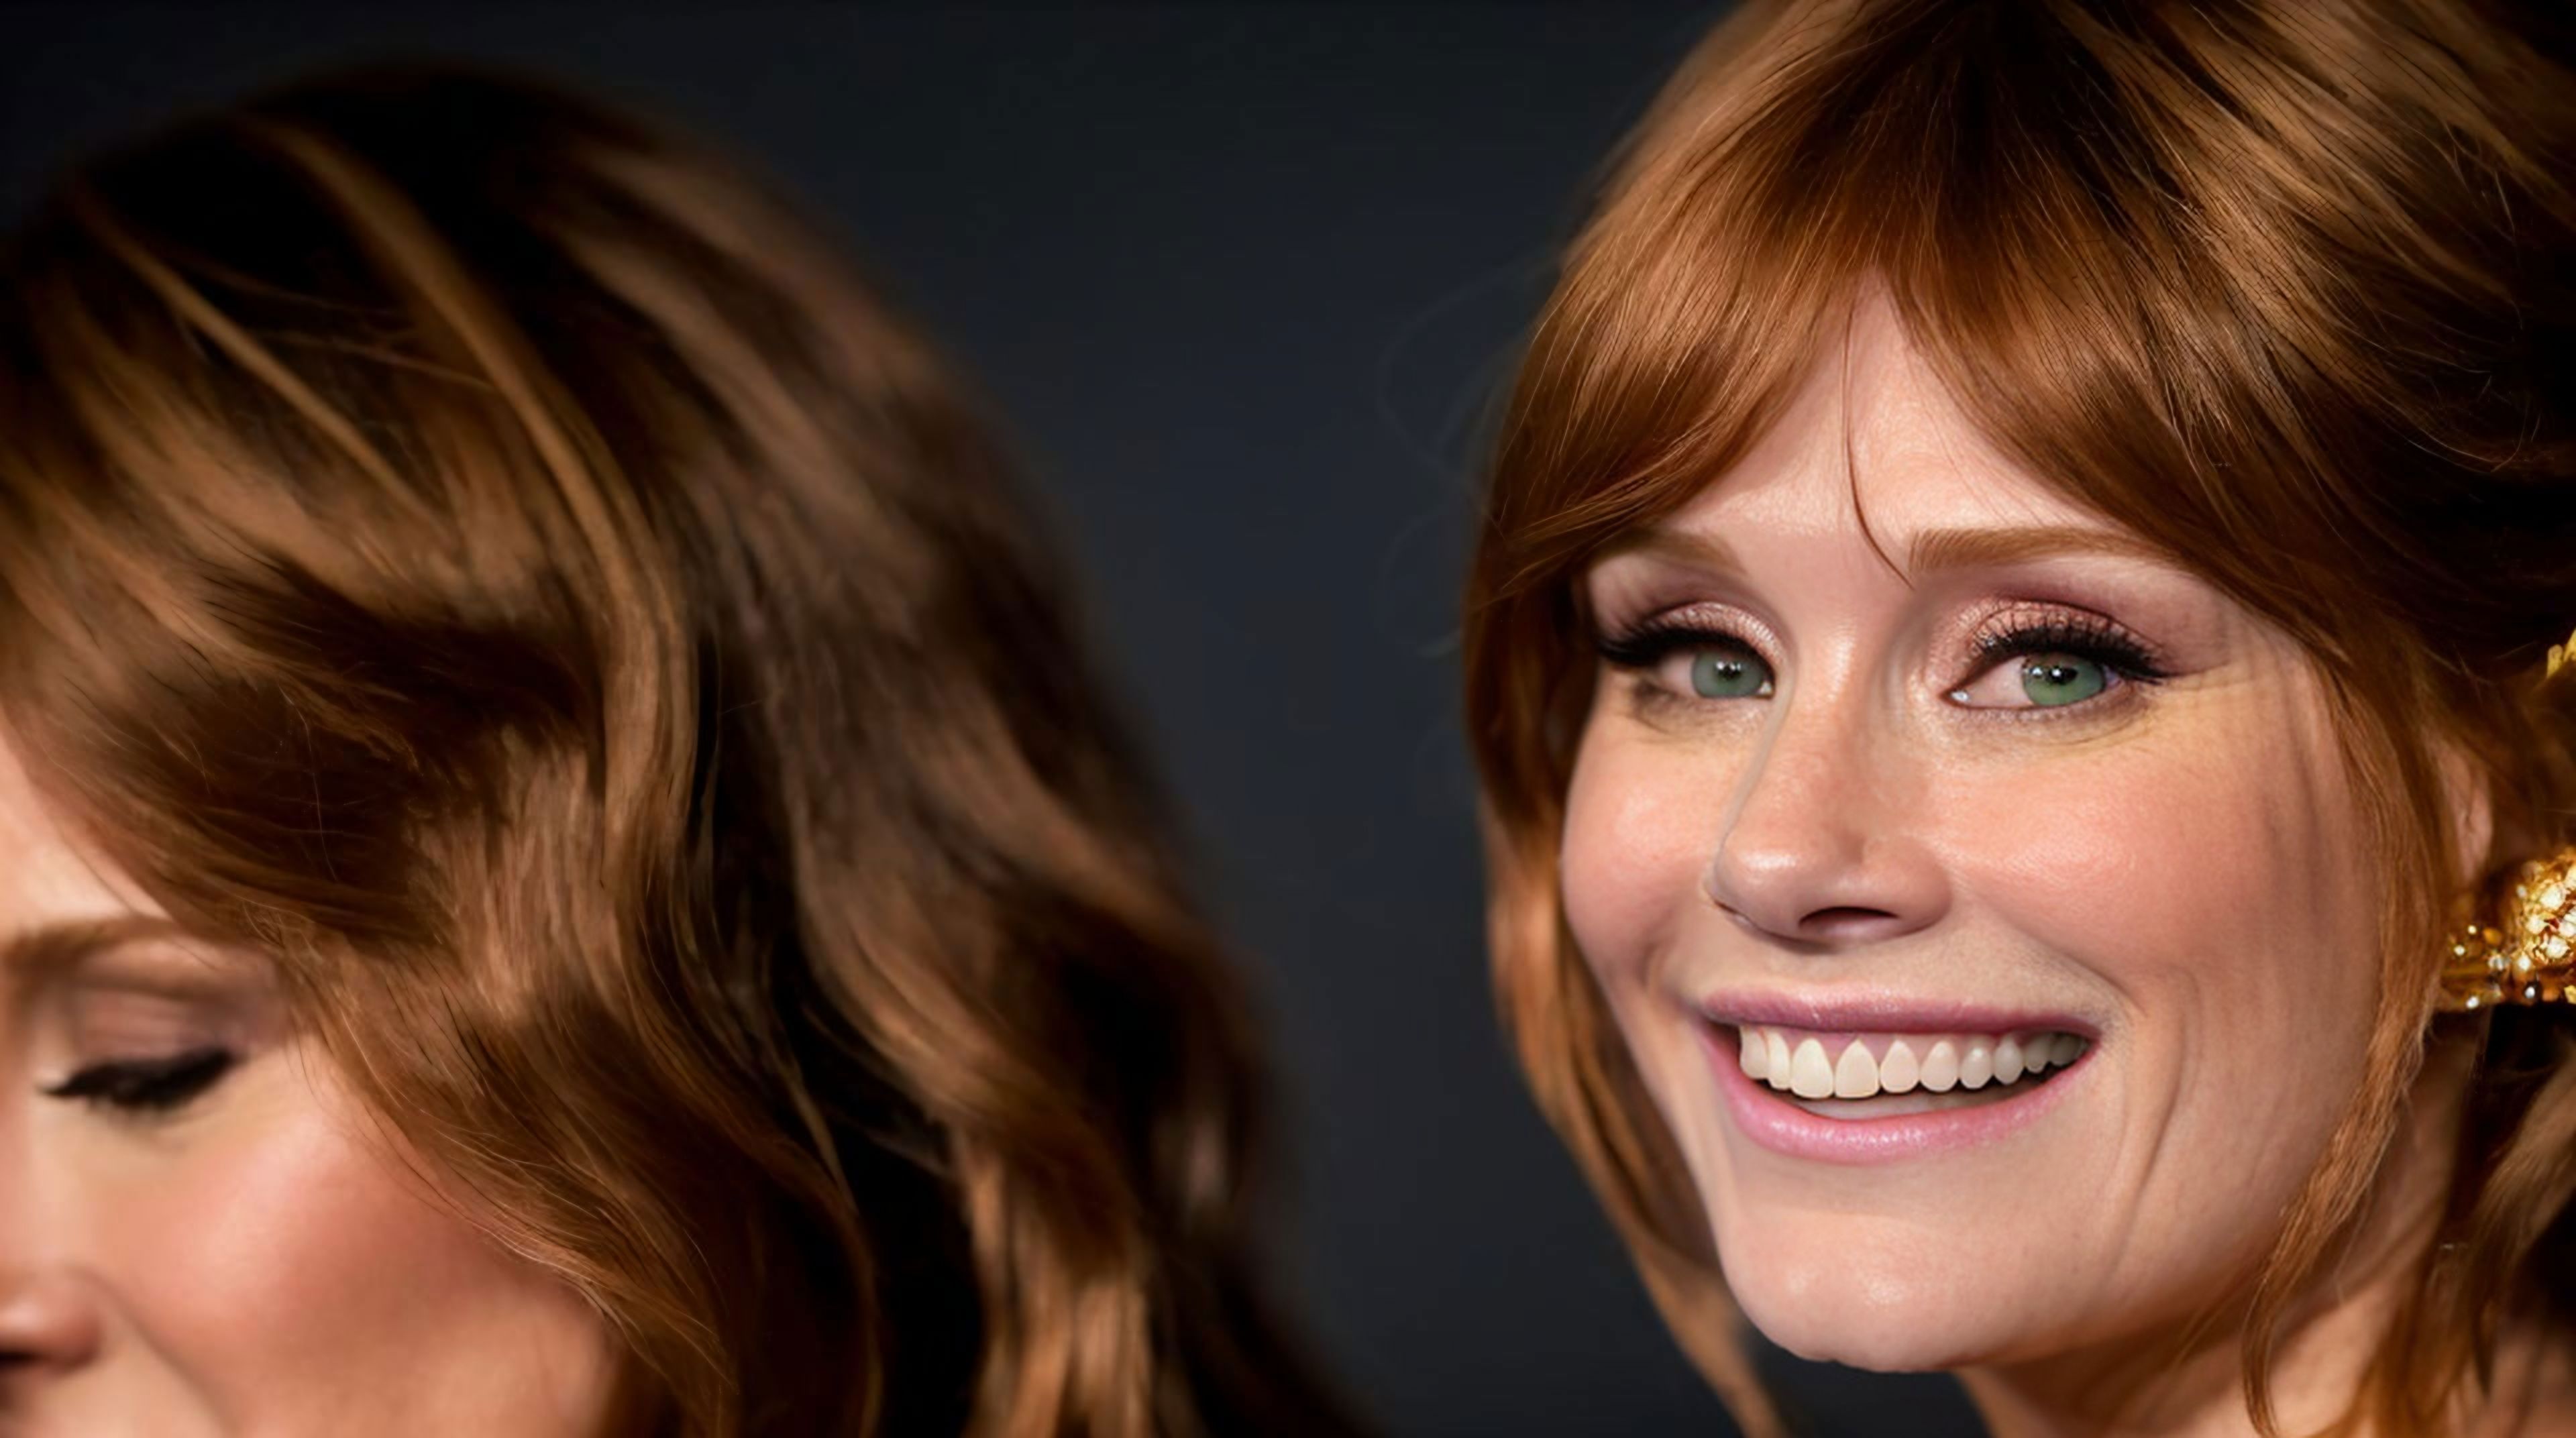 Bryce Dallas Howard image by TheLoraCollective